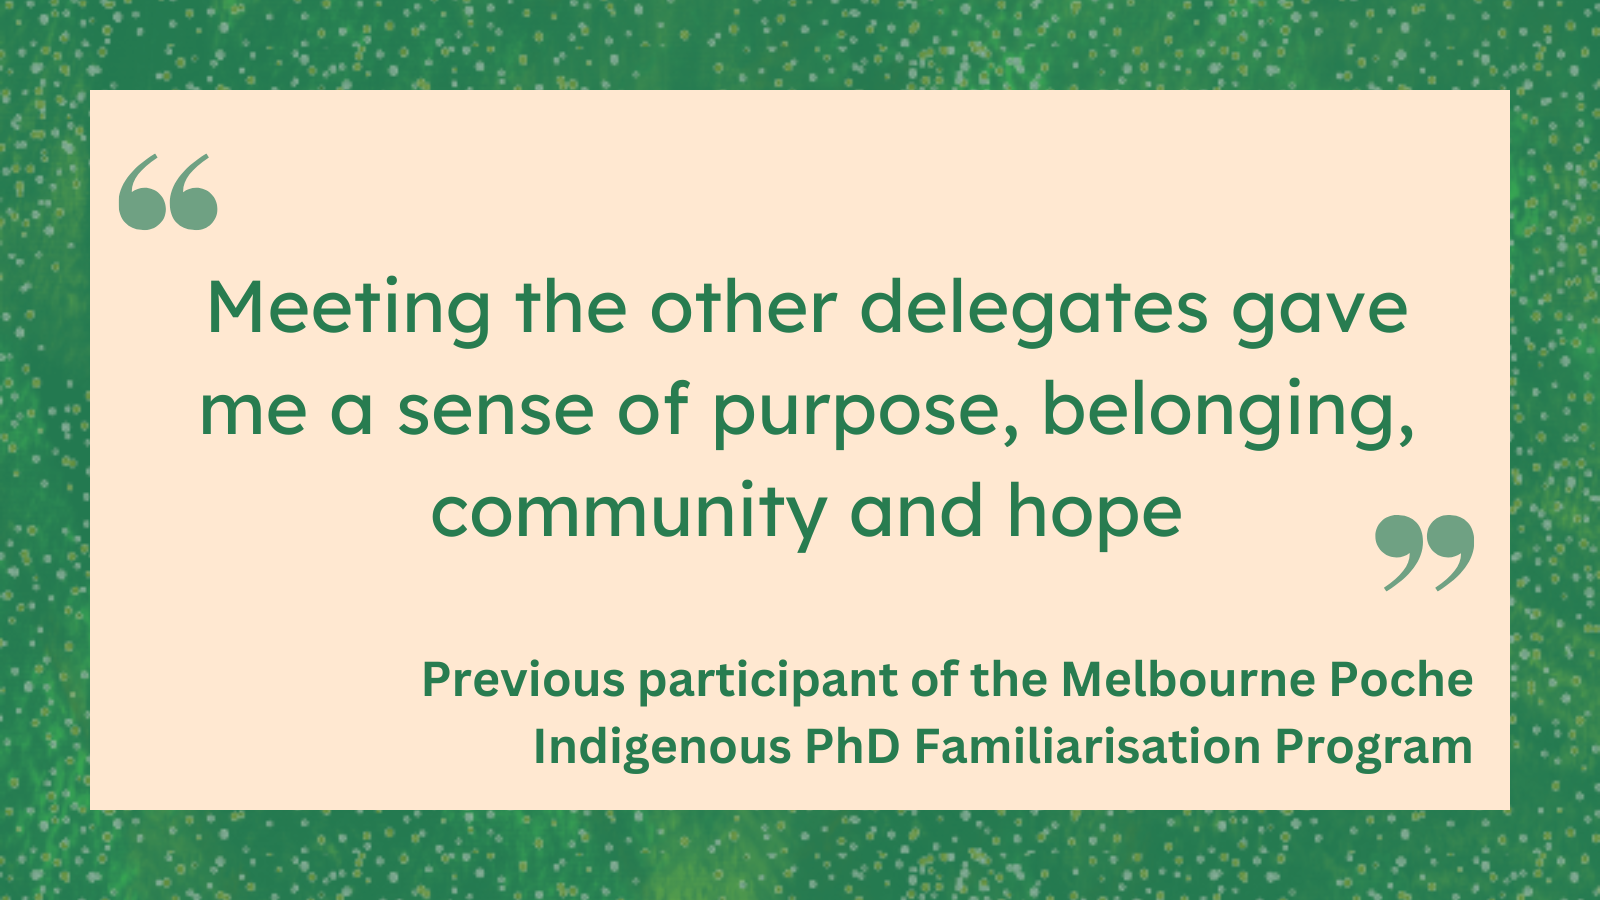 Quote: Meeting other delegates gave me a sense of purpose, belonging, community and hope